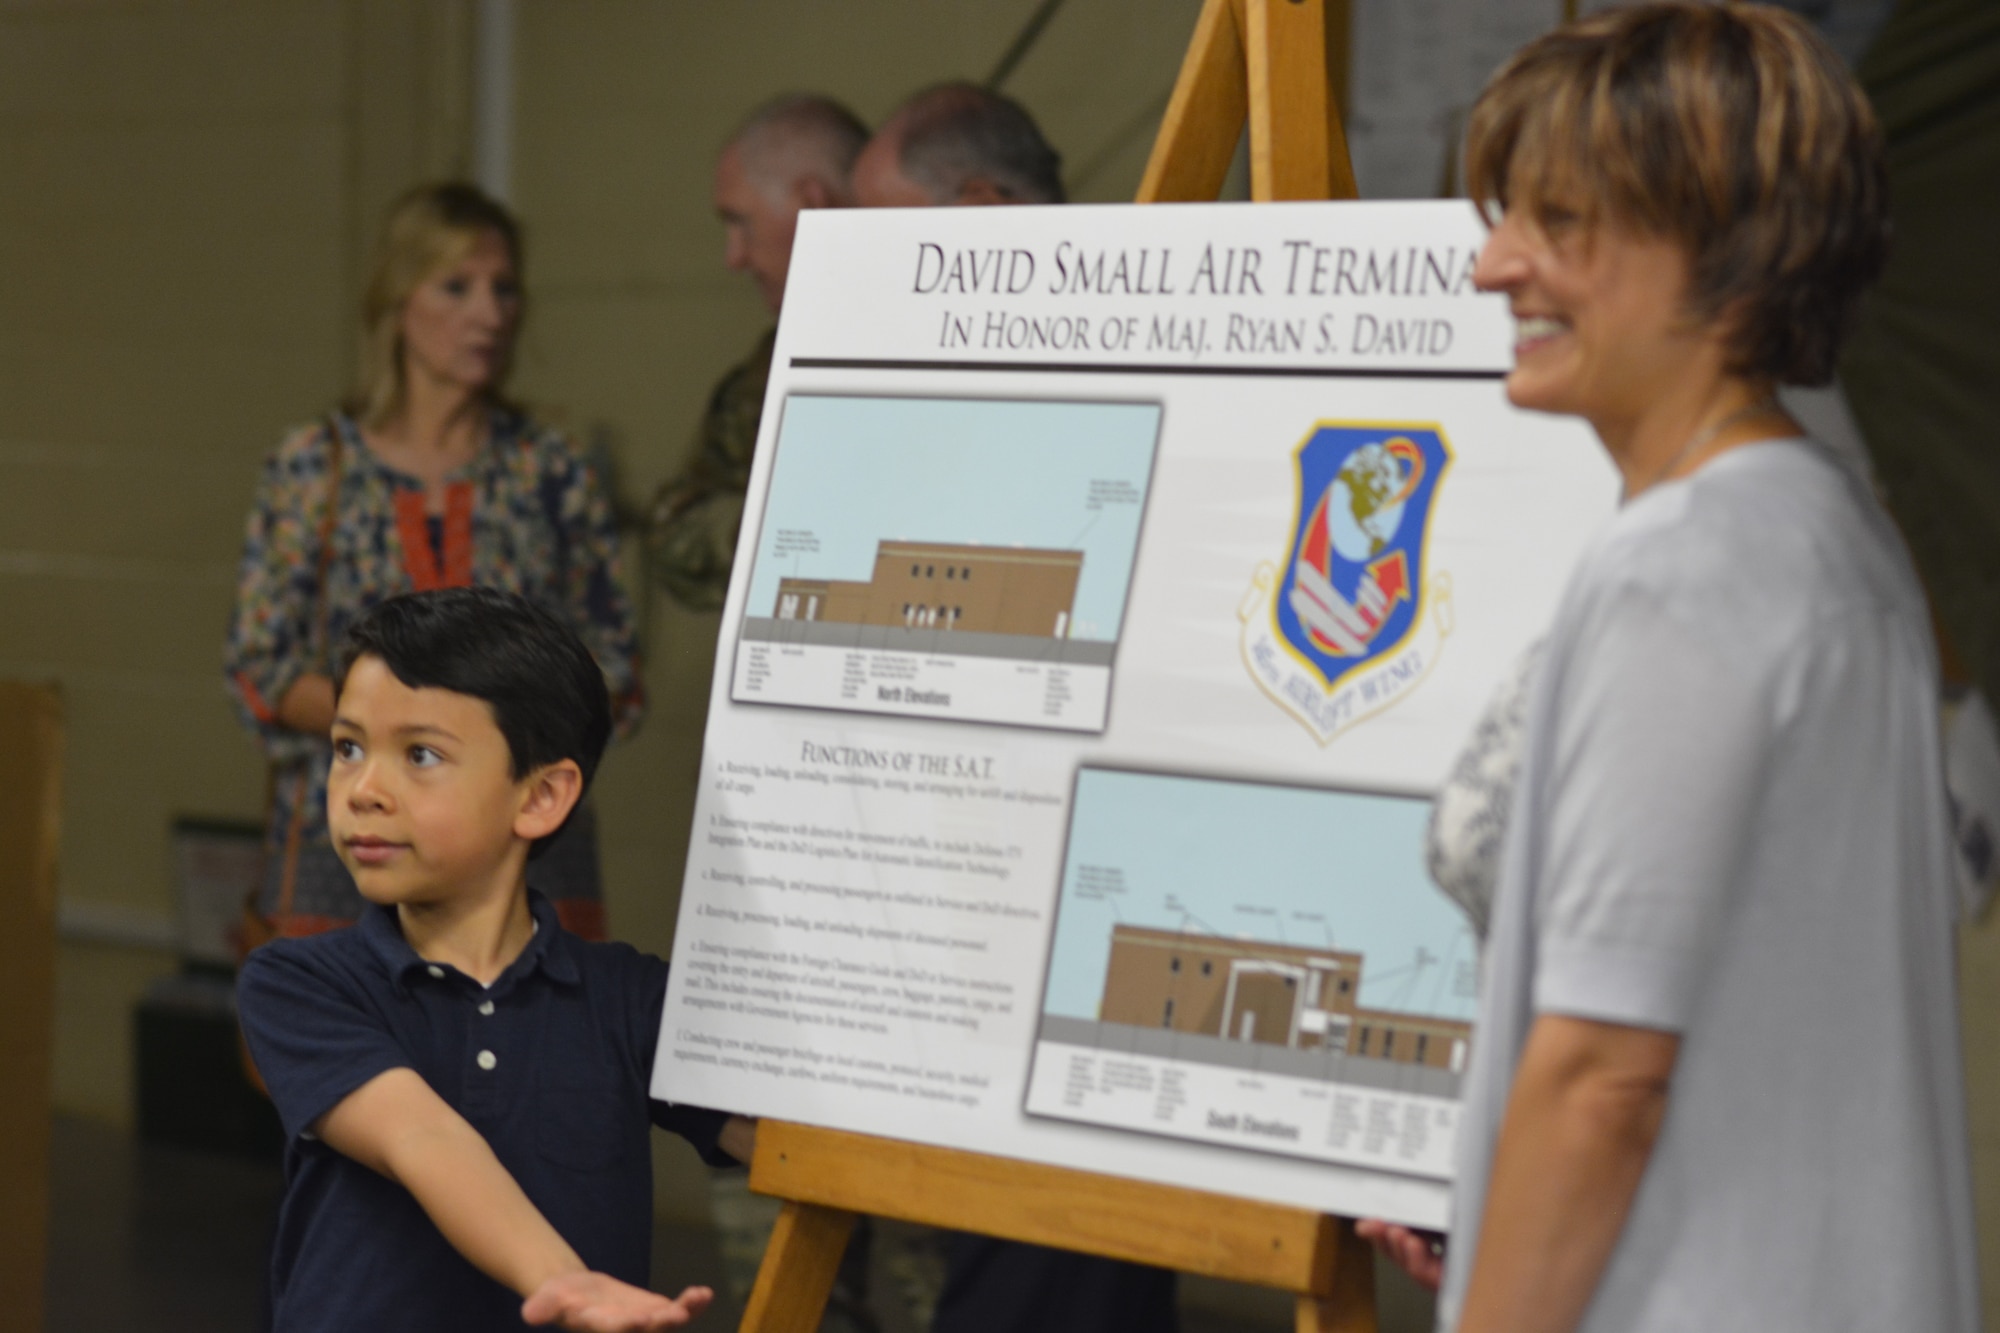 The wife and son of U.S. Air Force Maj. Ryan David show off a display made to explain the function of a Small Air Terminal, following a building dedication ceremony at the North Carolina Air National Guard Base, Charlotte Douglas International Airport, June 9, 2019. The 145th Airlift Wing dedicated four buildings across the base to the fallen members of the MAFFS aircrew, including Maj. David, who passed away in 2012 following an accident while fighting a wild fire in South Dakota.